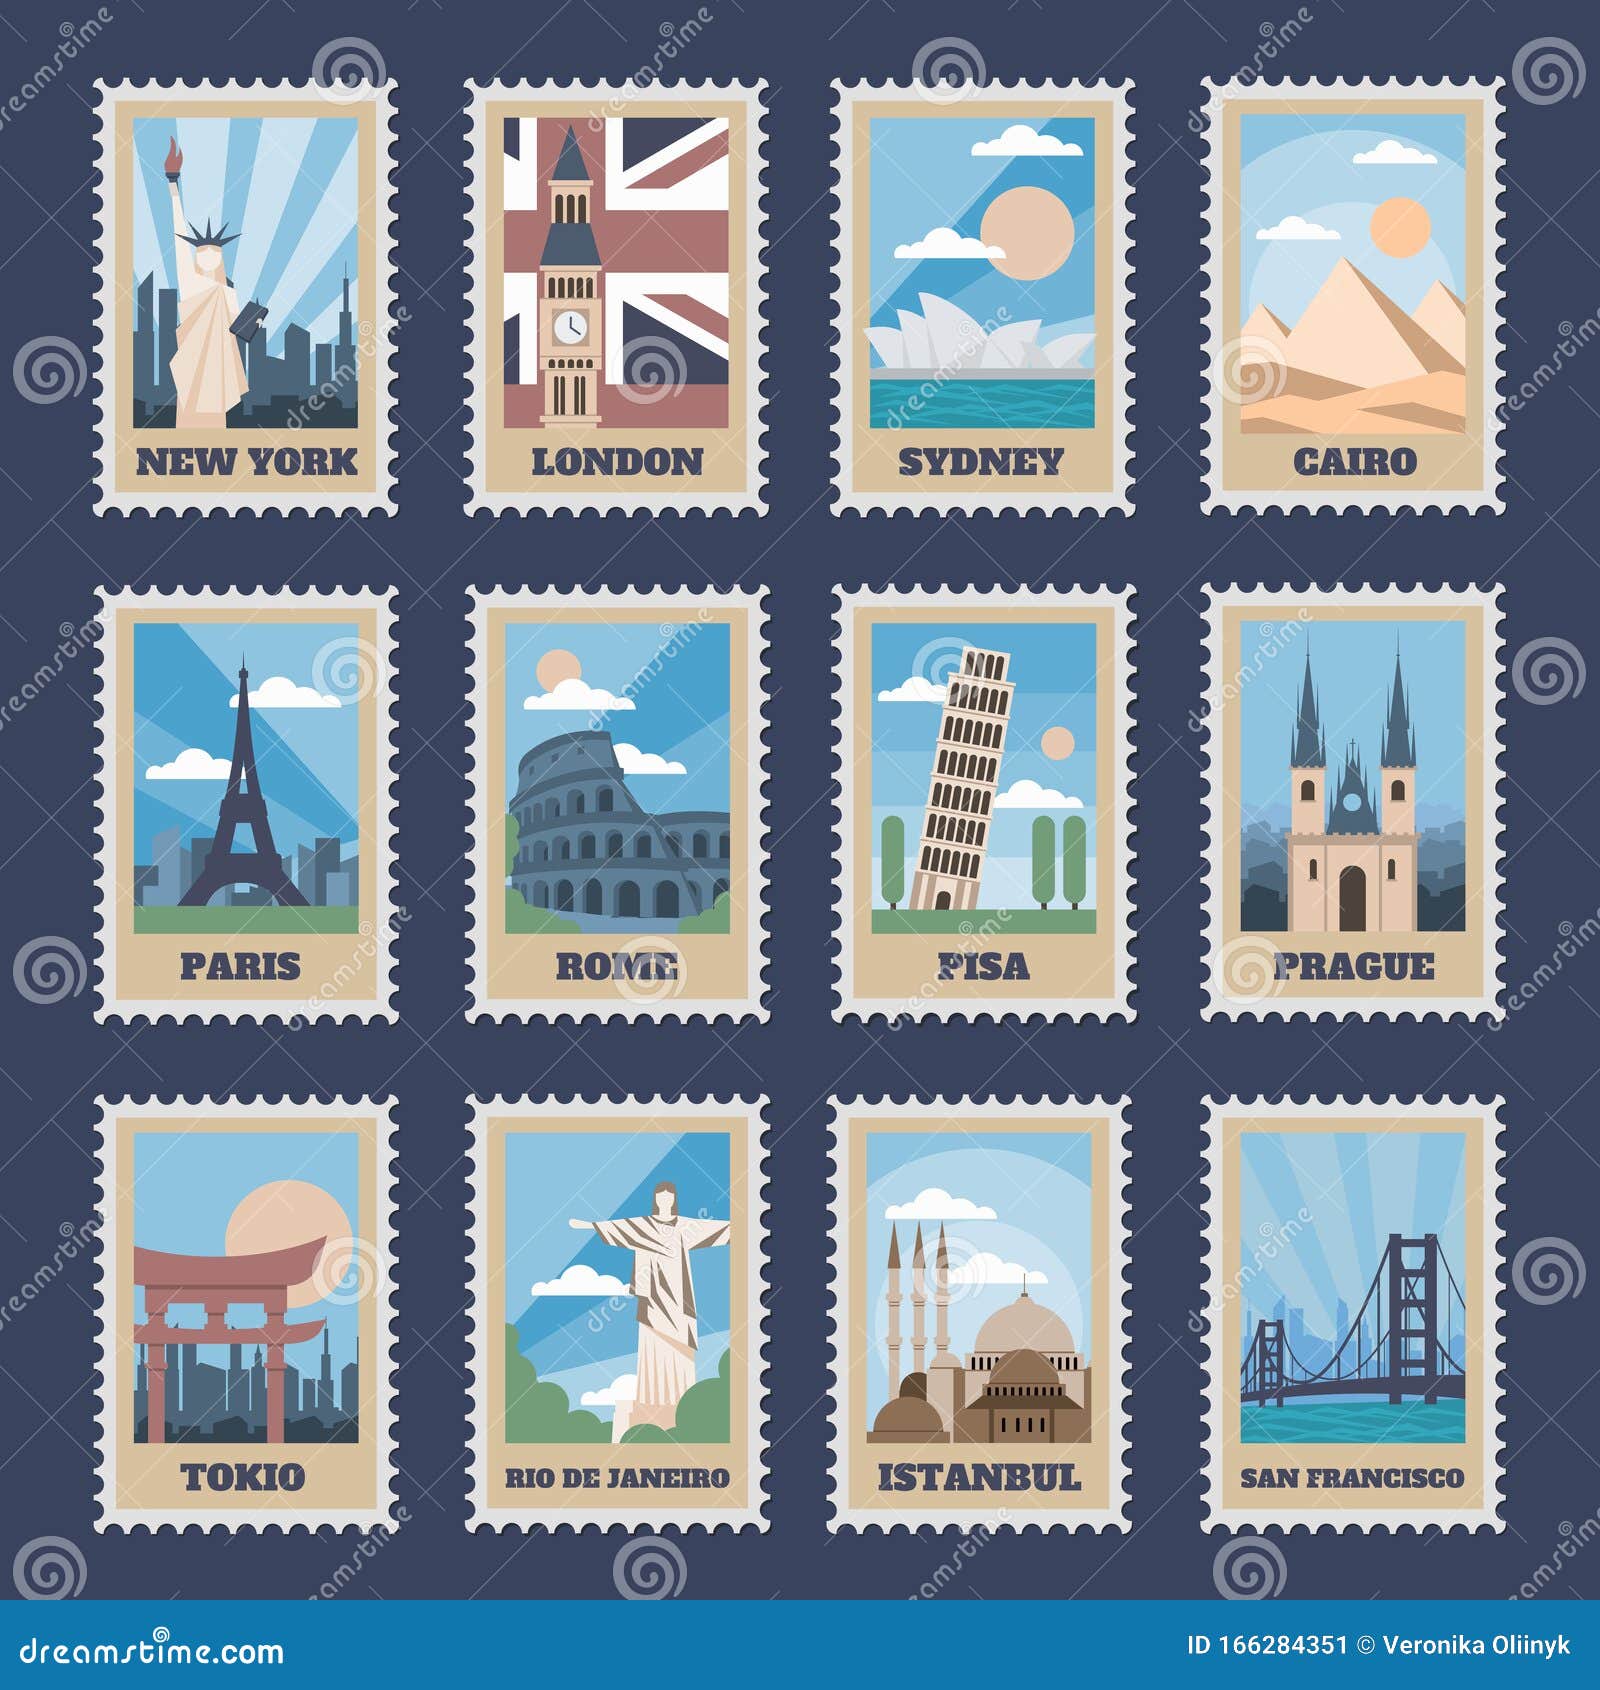 old fashioned travel stamps